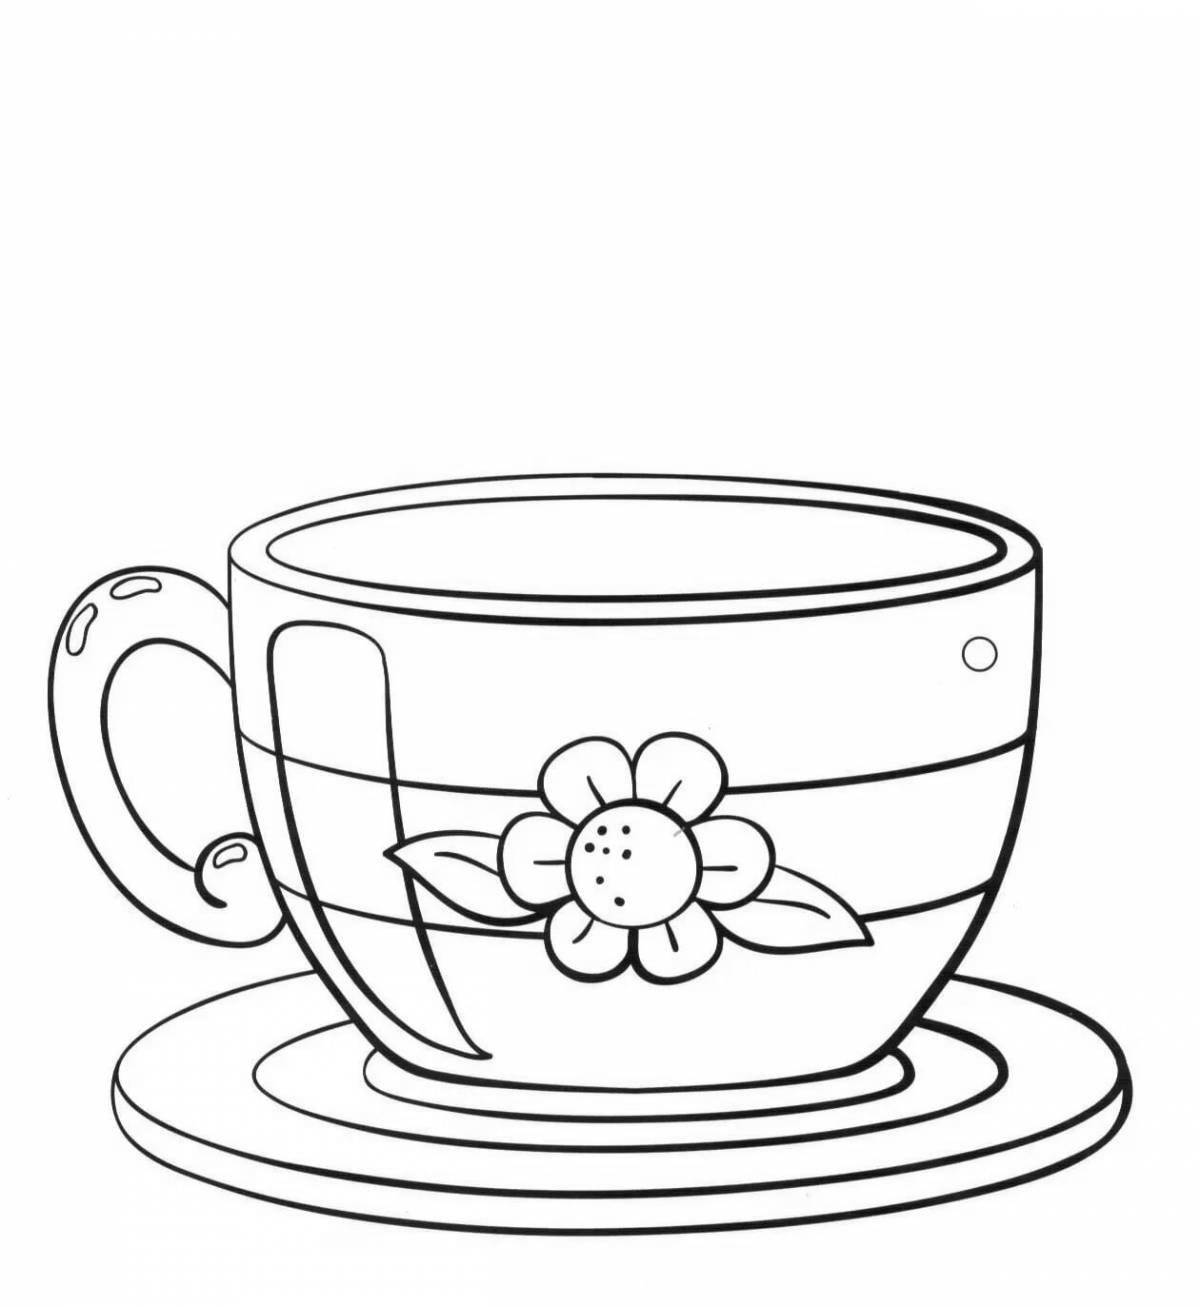 Jovial cup coloring book for kids